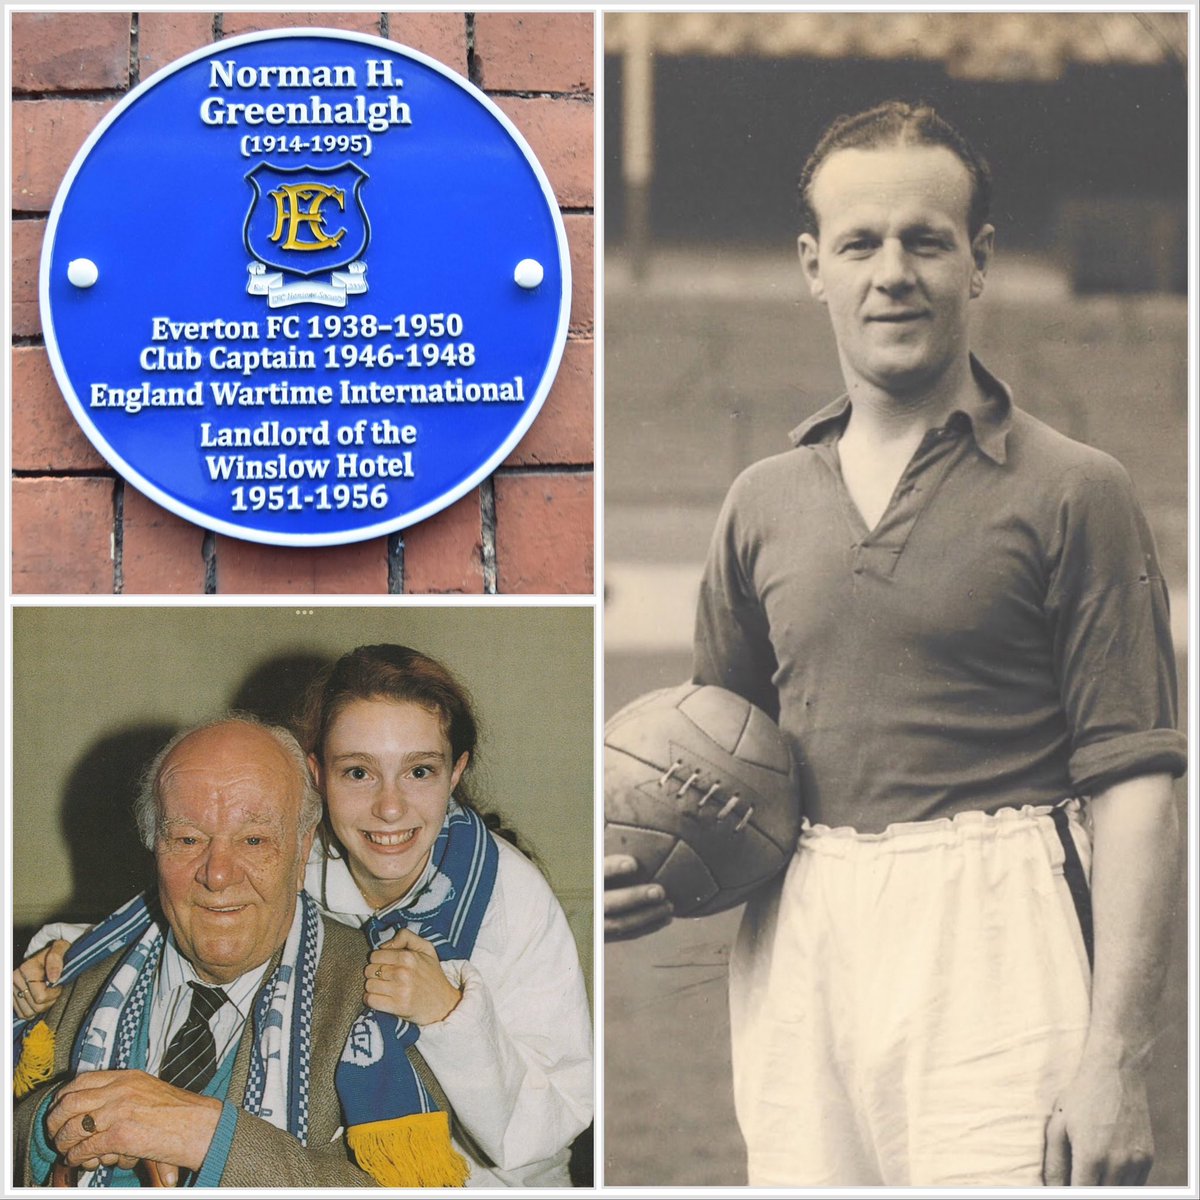 Norman Greenhalgh, one of two Boltonians in Everton’s Class of ‘39. ‘Rollicker’ was a hard-tackling full-back signed from New Brighton. He was the Toffees captain post-war & managed @TheWinslowHotel . Buy Broken Dreams on @Toffeebooks for his full story: mountvernonpublishing.com/catalogue/brok…